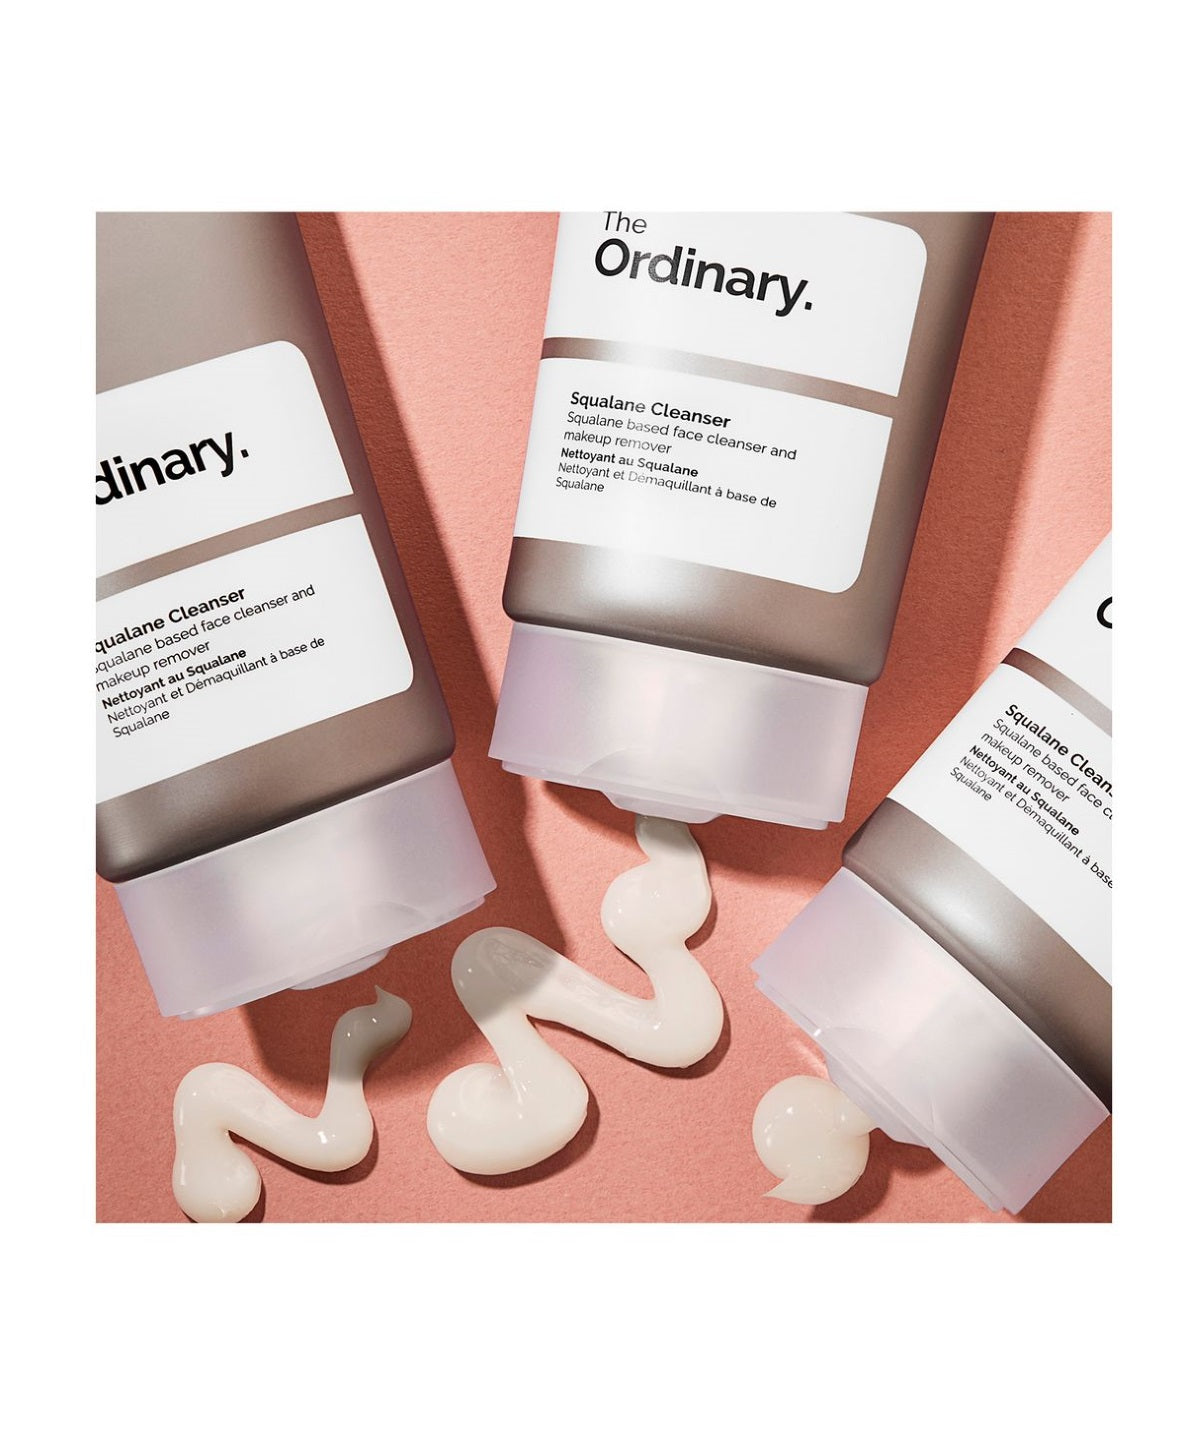 Squalane Cleanser by The Ordinary in UAE, Dubai and Abu Dhabi at Shopey